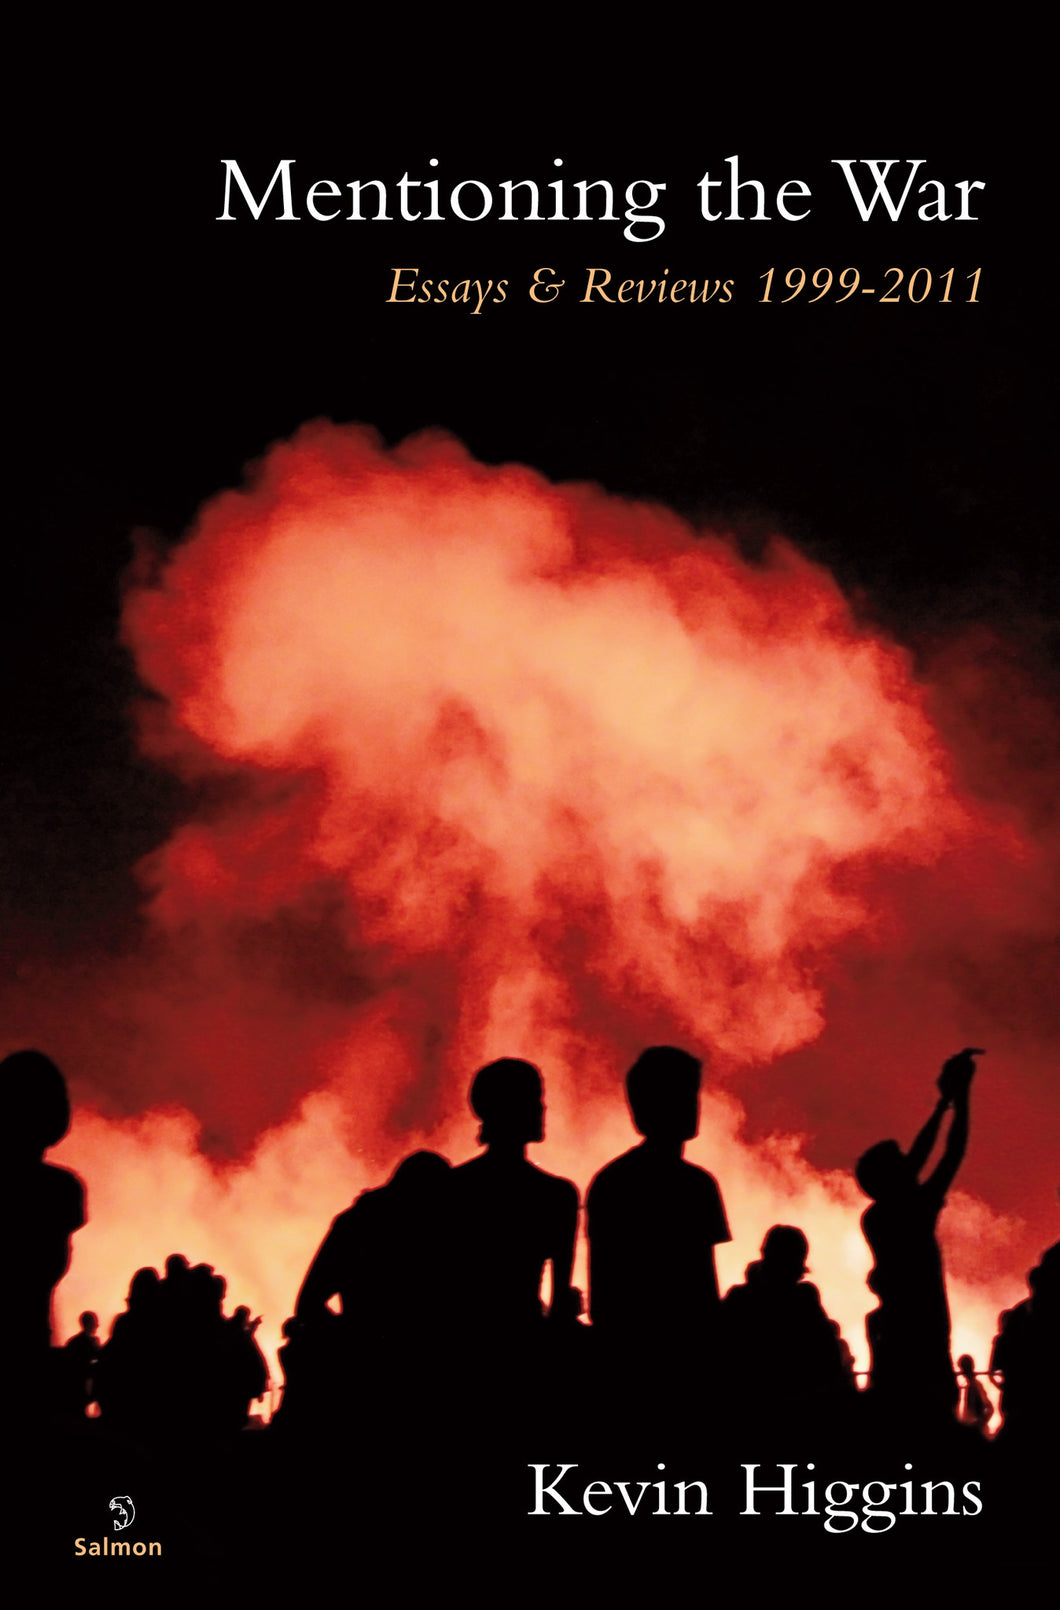 Mentioning the War: Essays & Reviews, 1995-2011